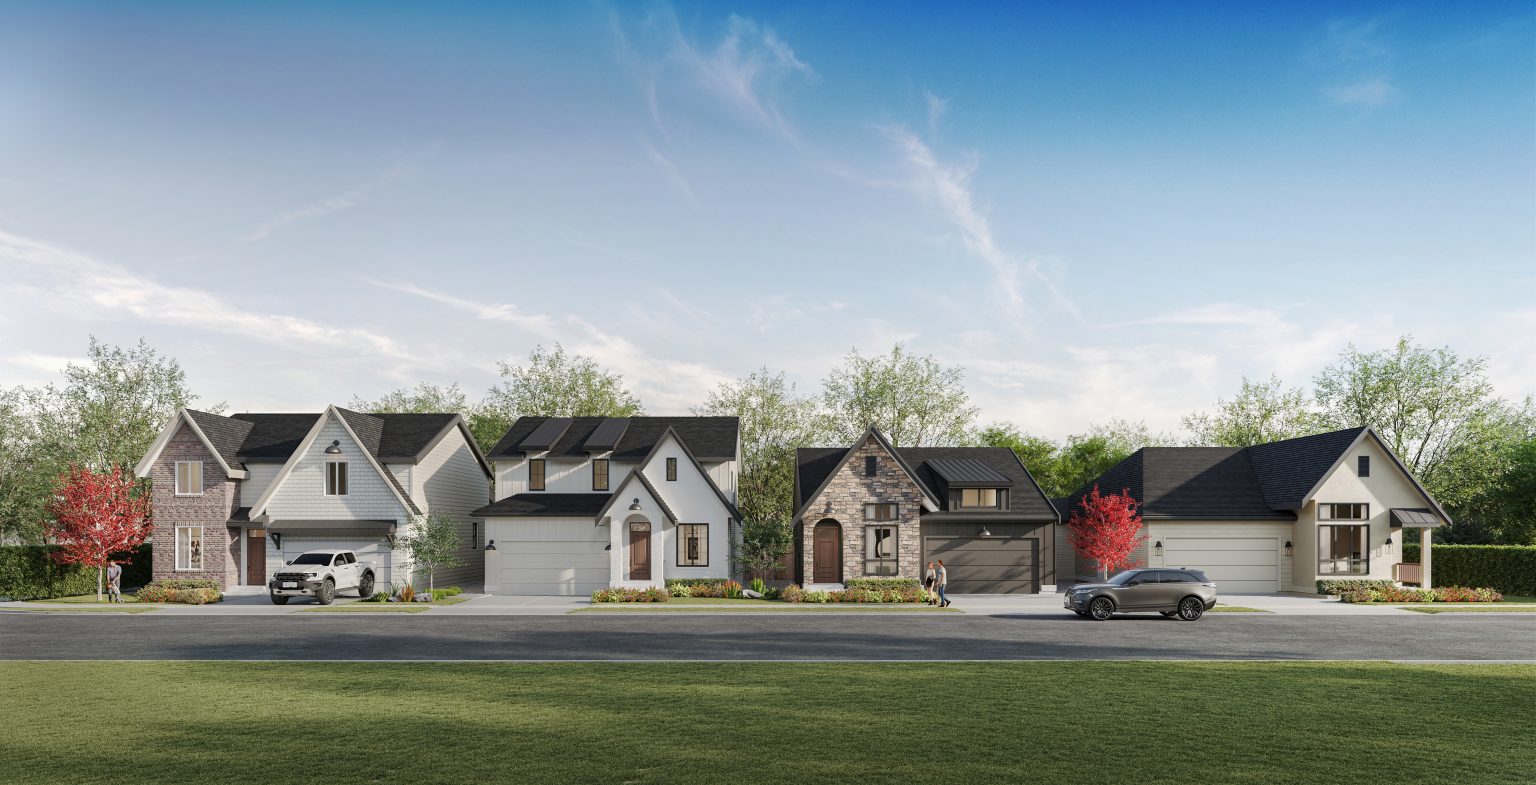 A golf course subdivision with 139 single-family homes.